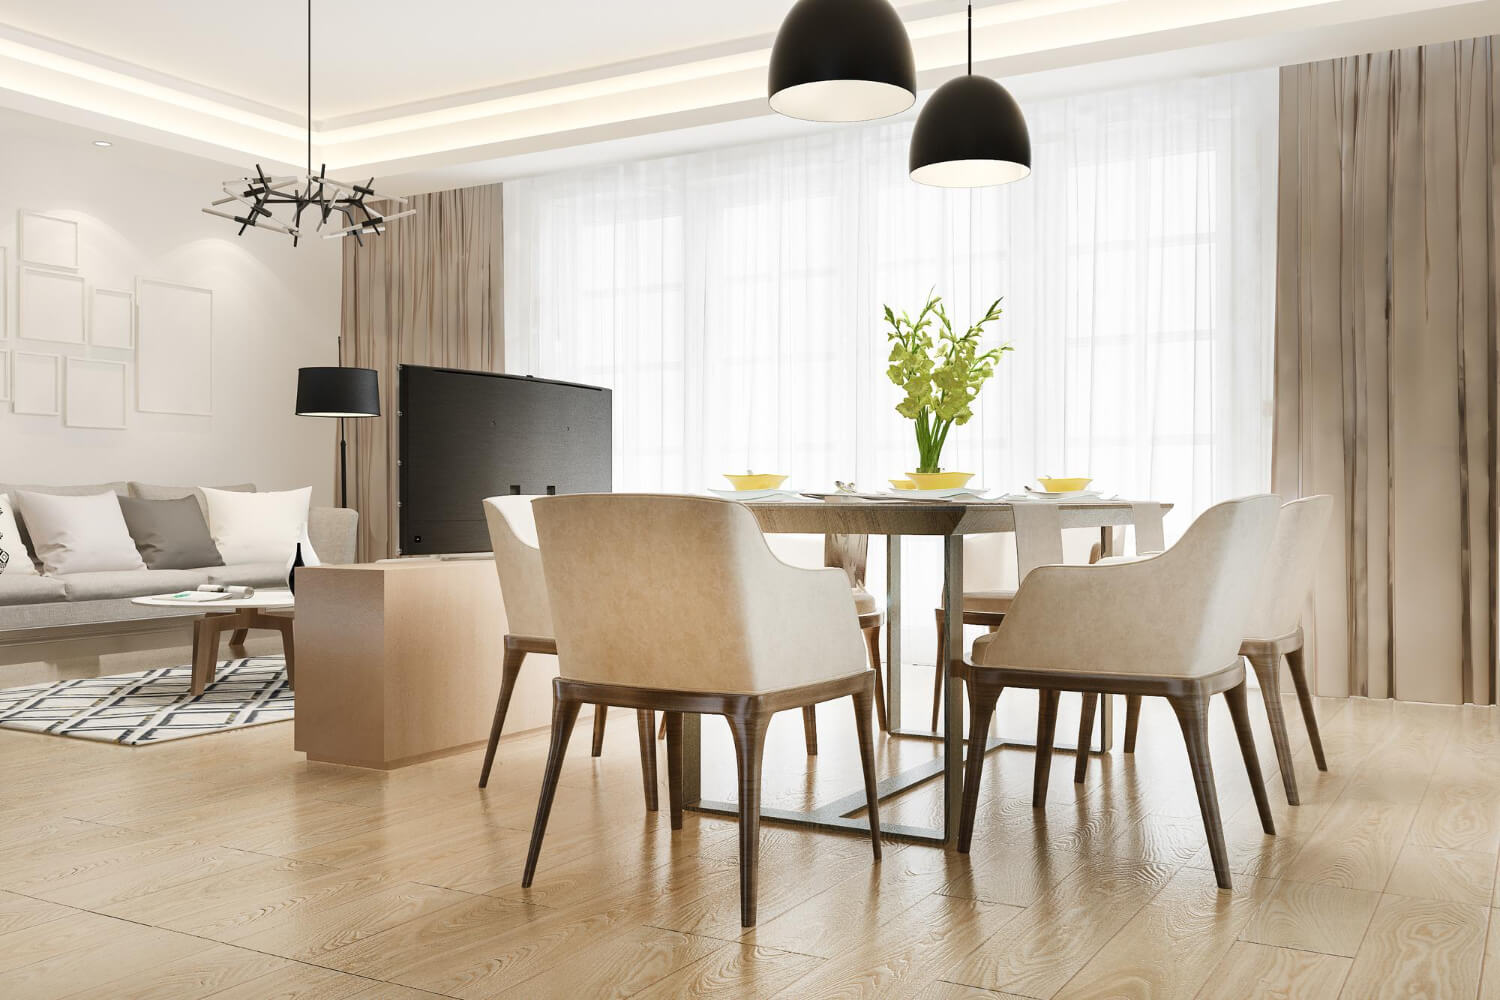 How to Design a Dining Room